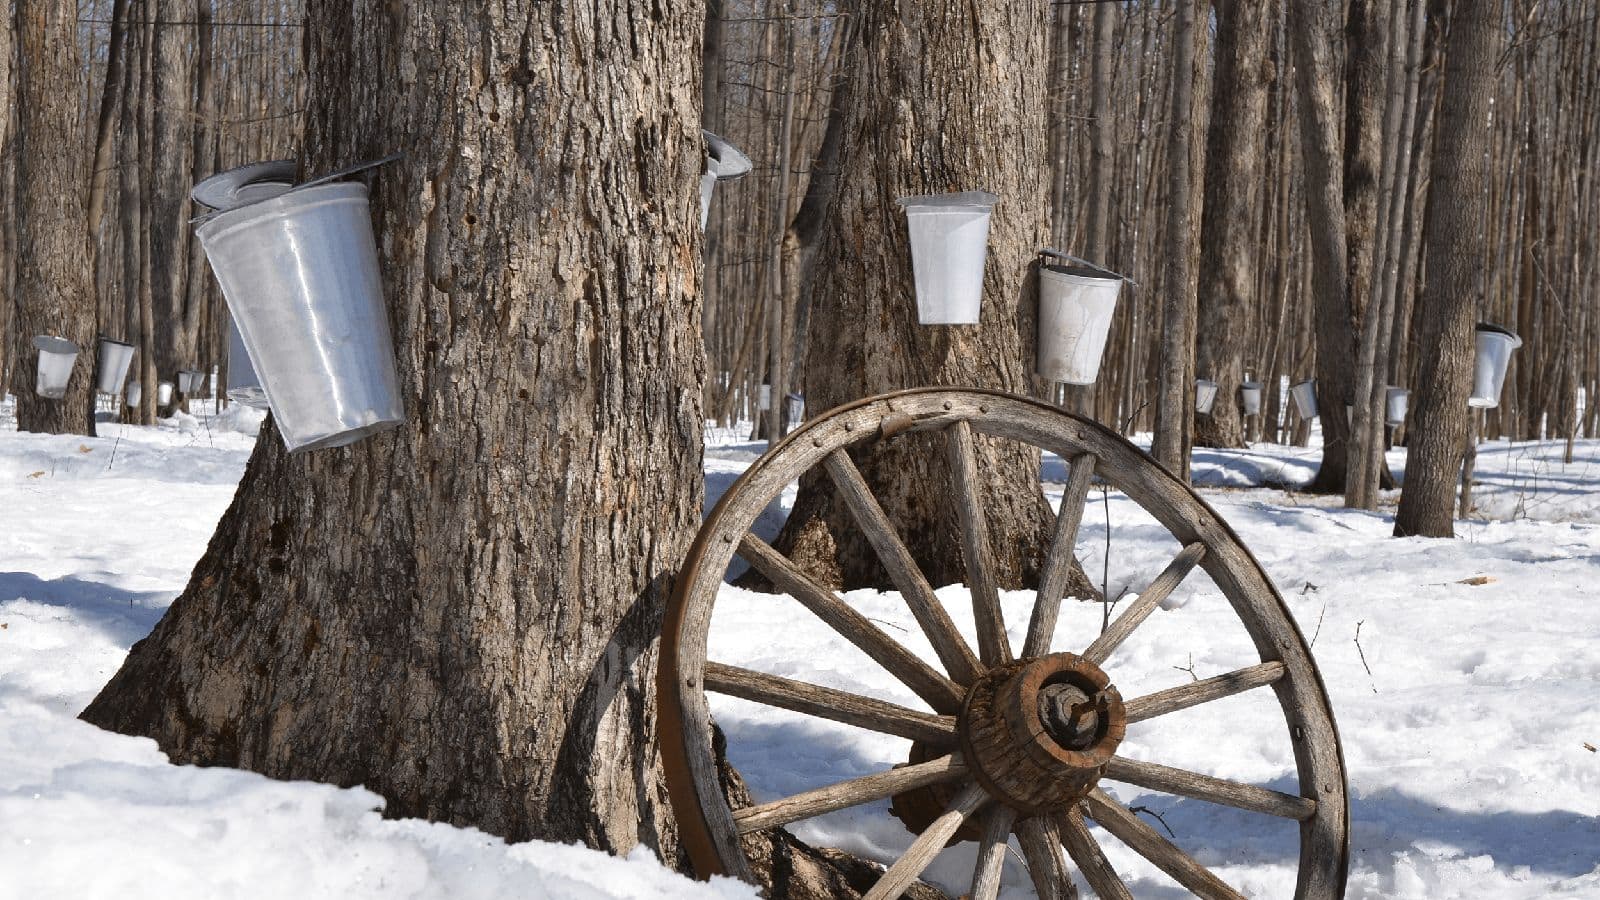 Montreal's maple syrup production is an attraction you can't miss